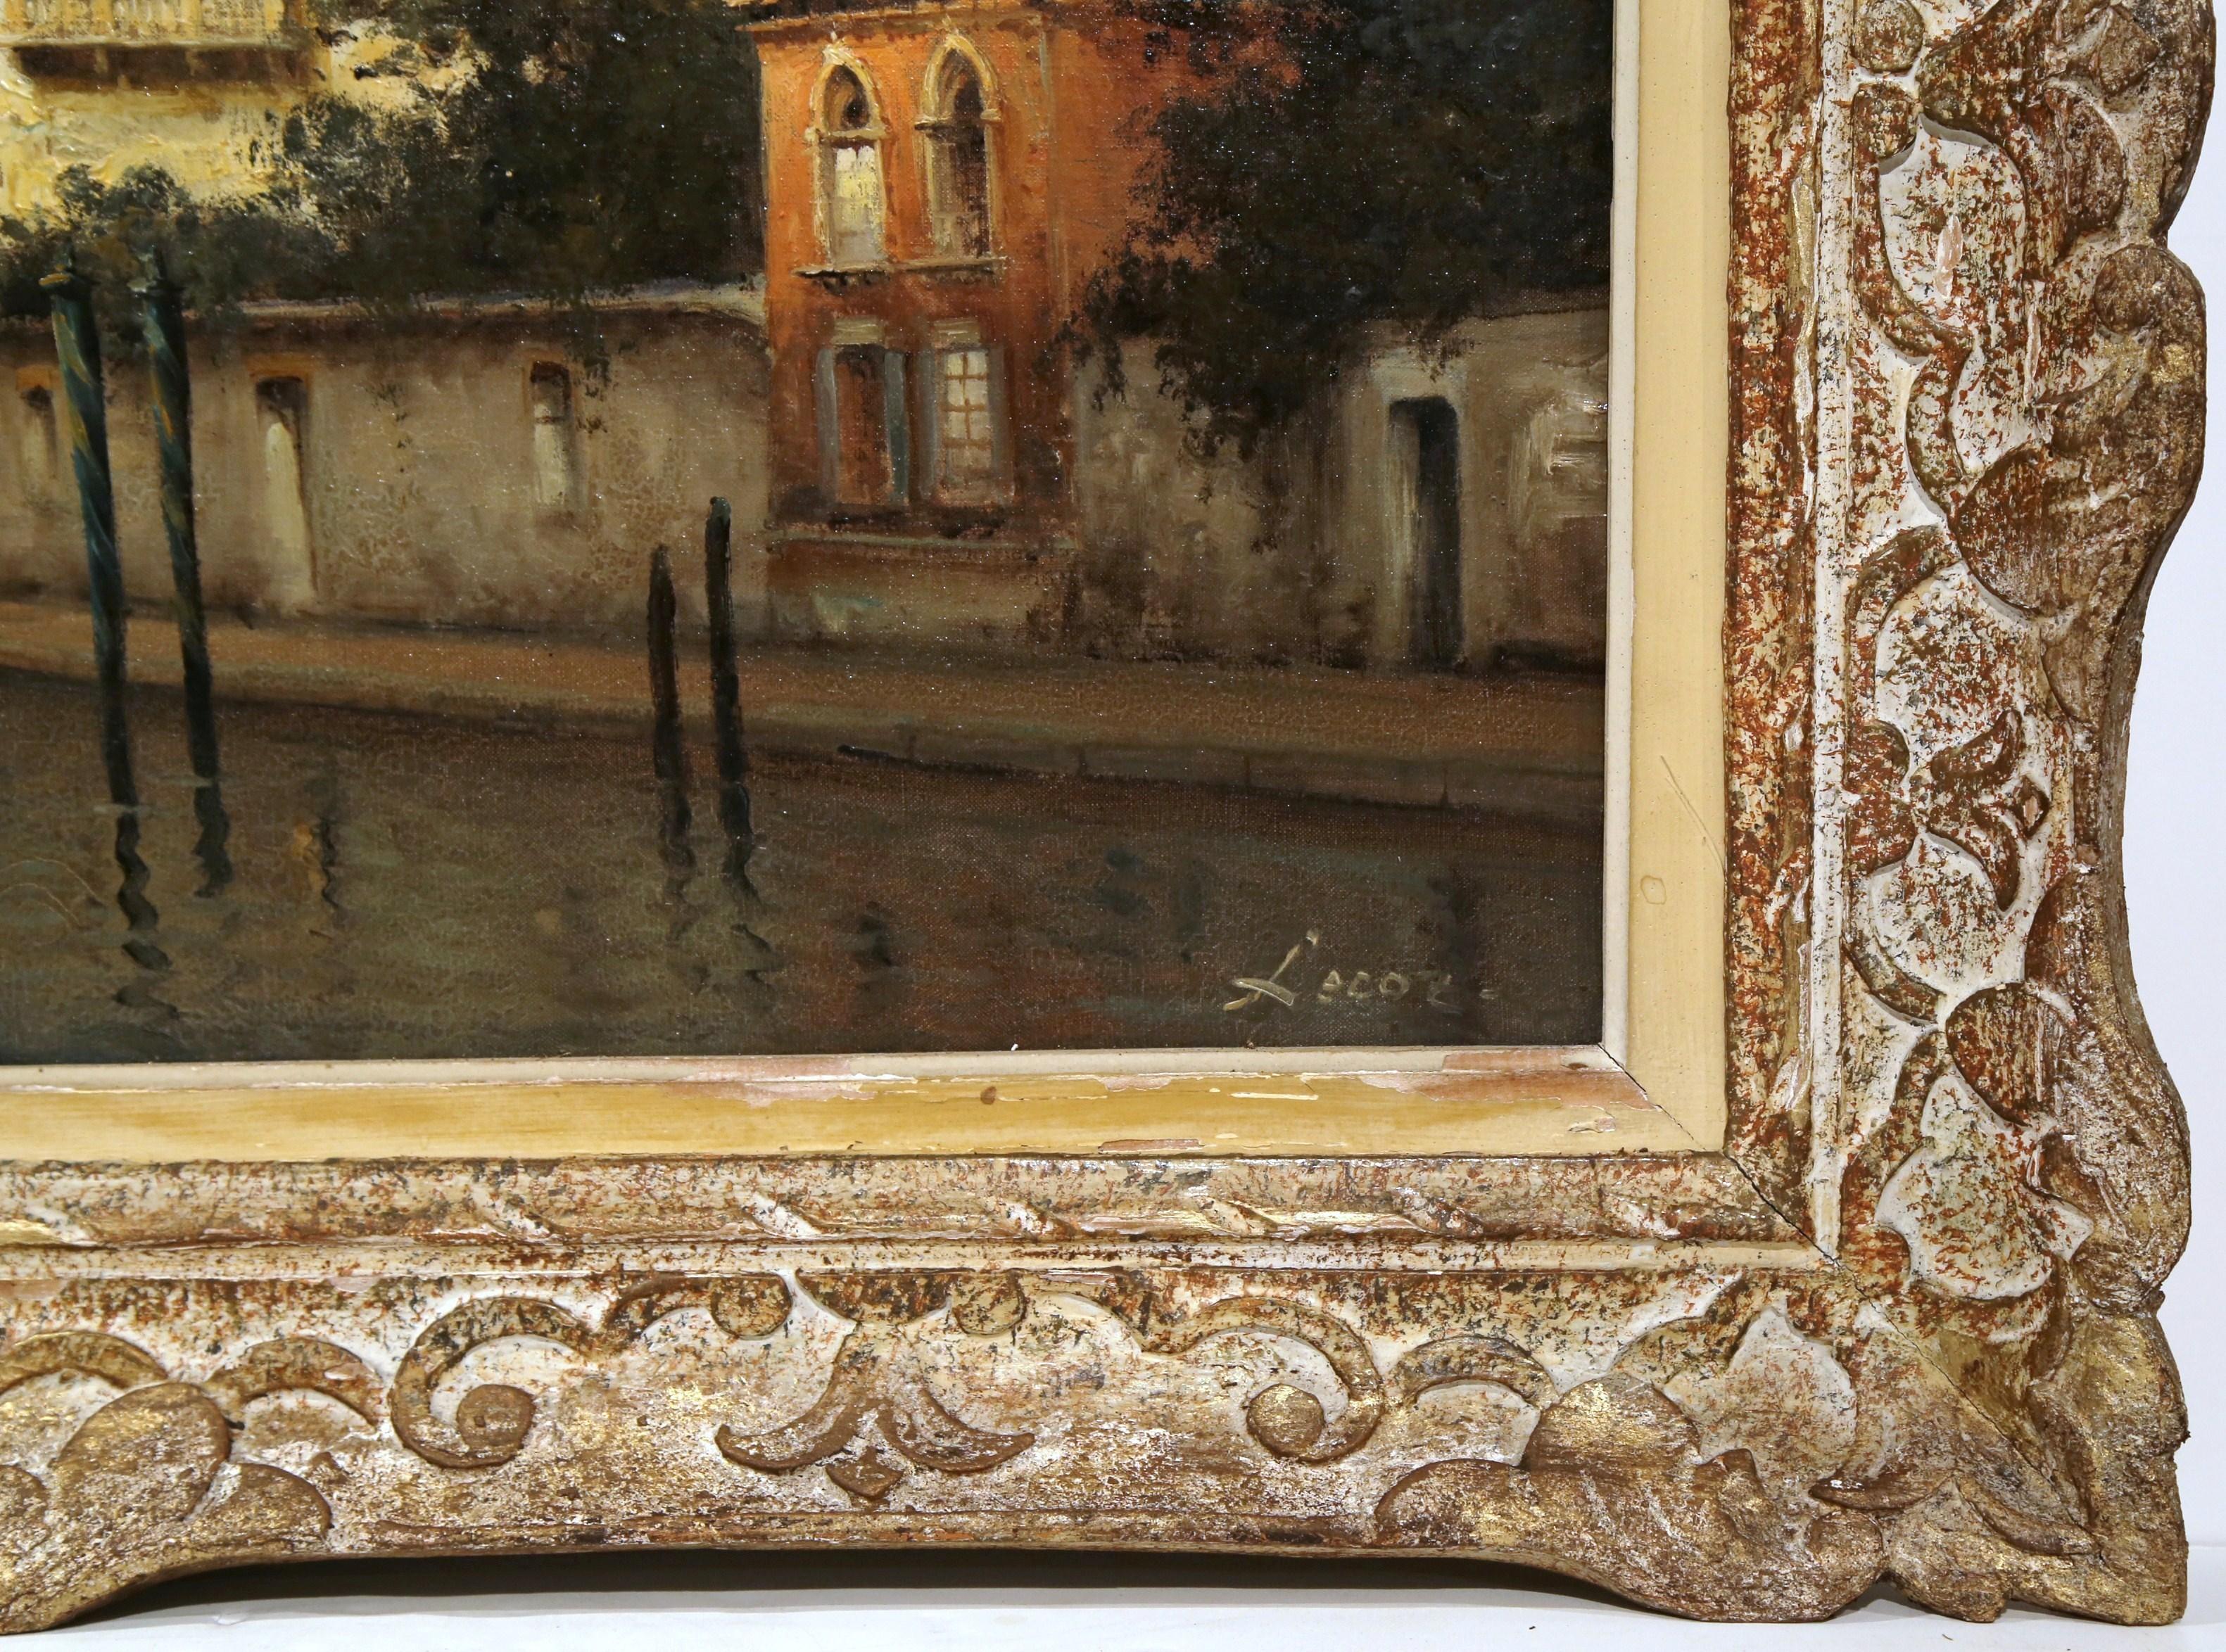 Canvas Early 20th Century Venice Oil Painting in Carved Frame Signed Alphonse Lecoz